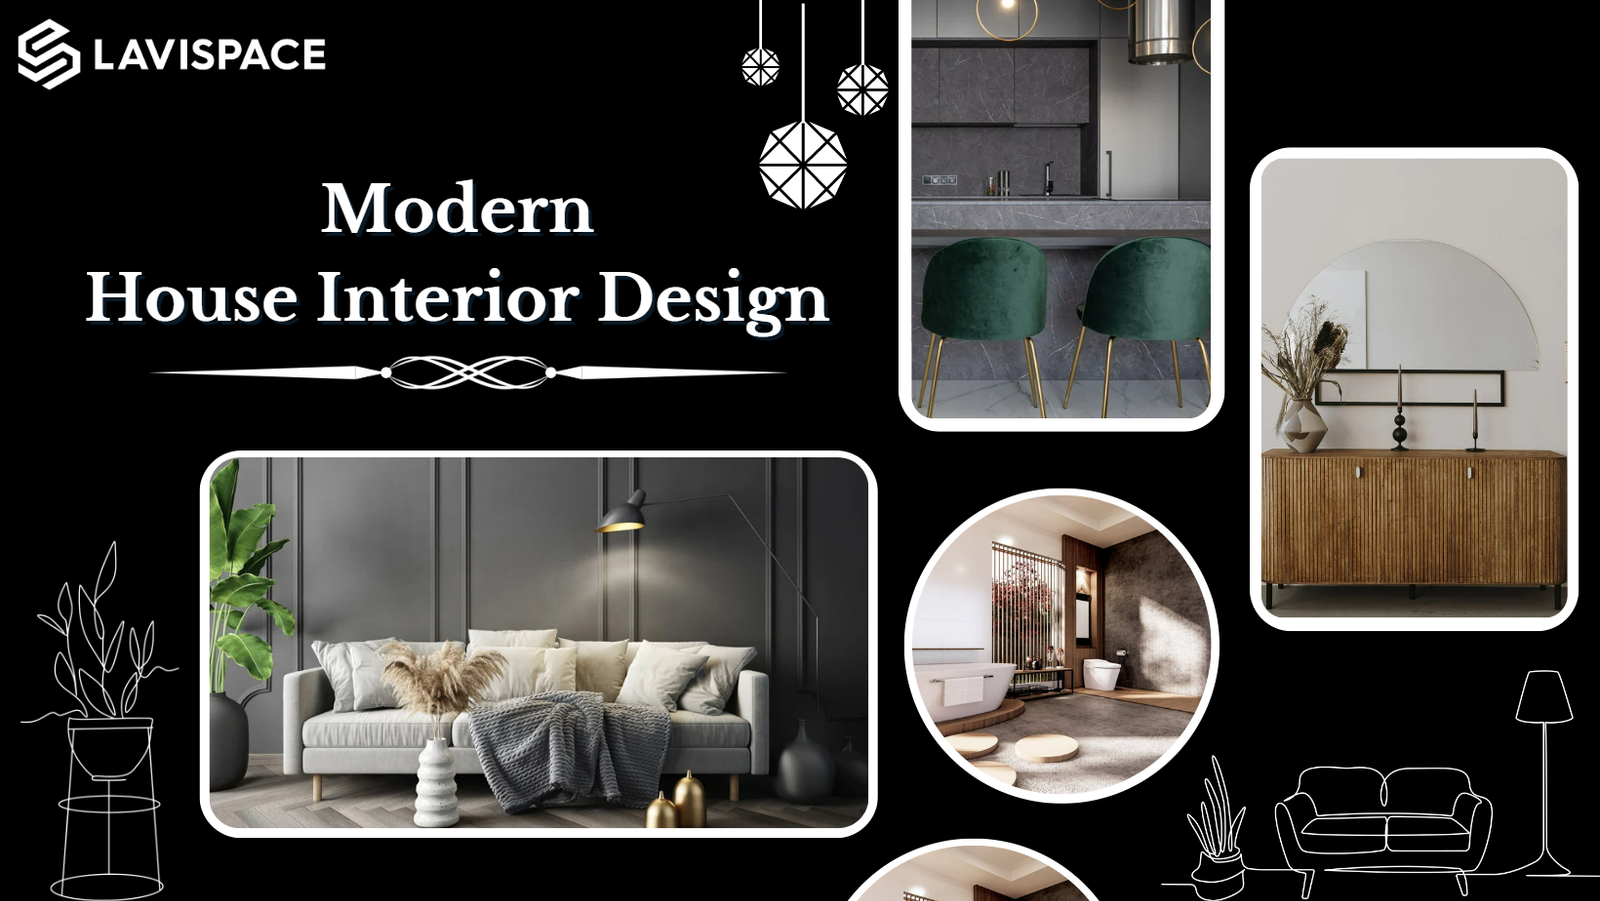 You are currently viewing Modern House Interior Design | Lavispace